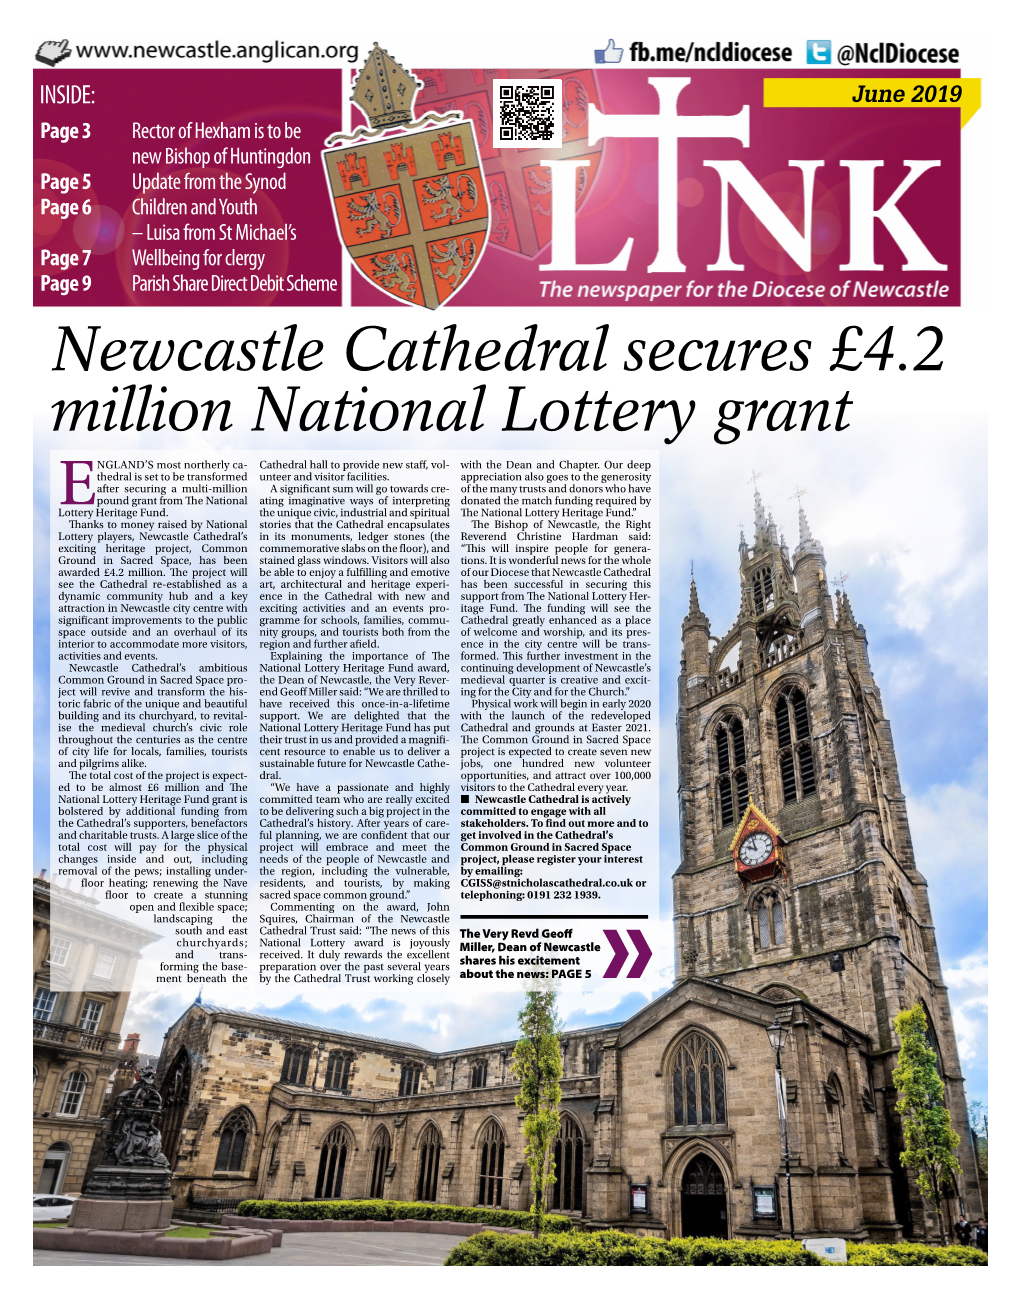 Newcastle Cathedral Secures £4.2 Million National Lottery Grant